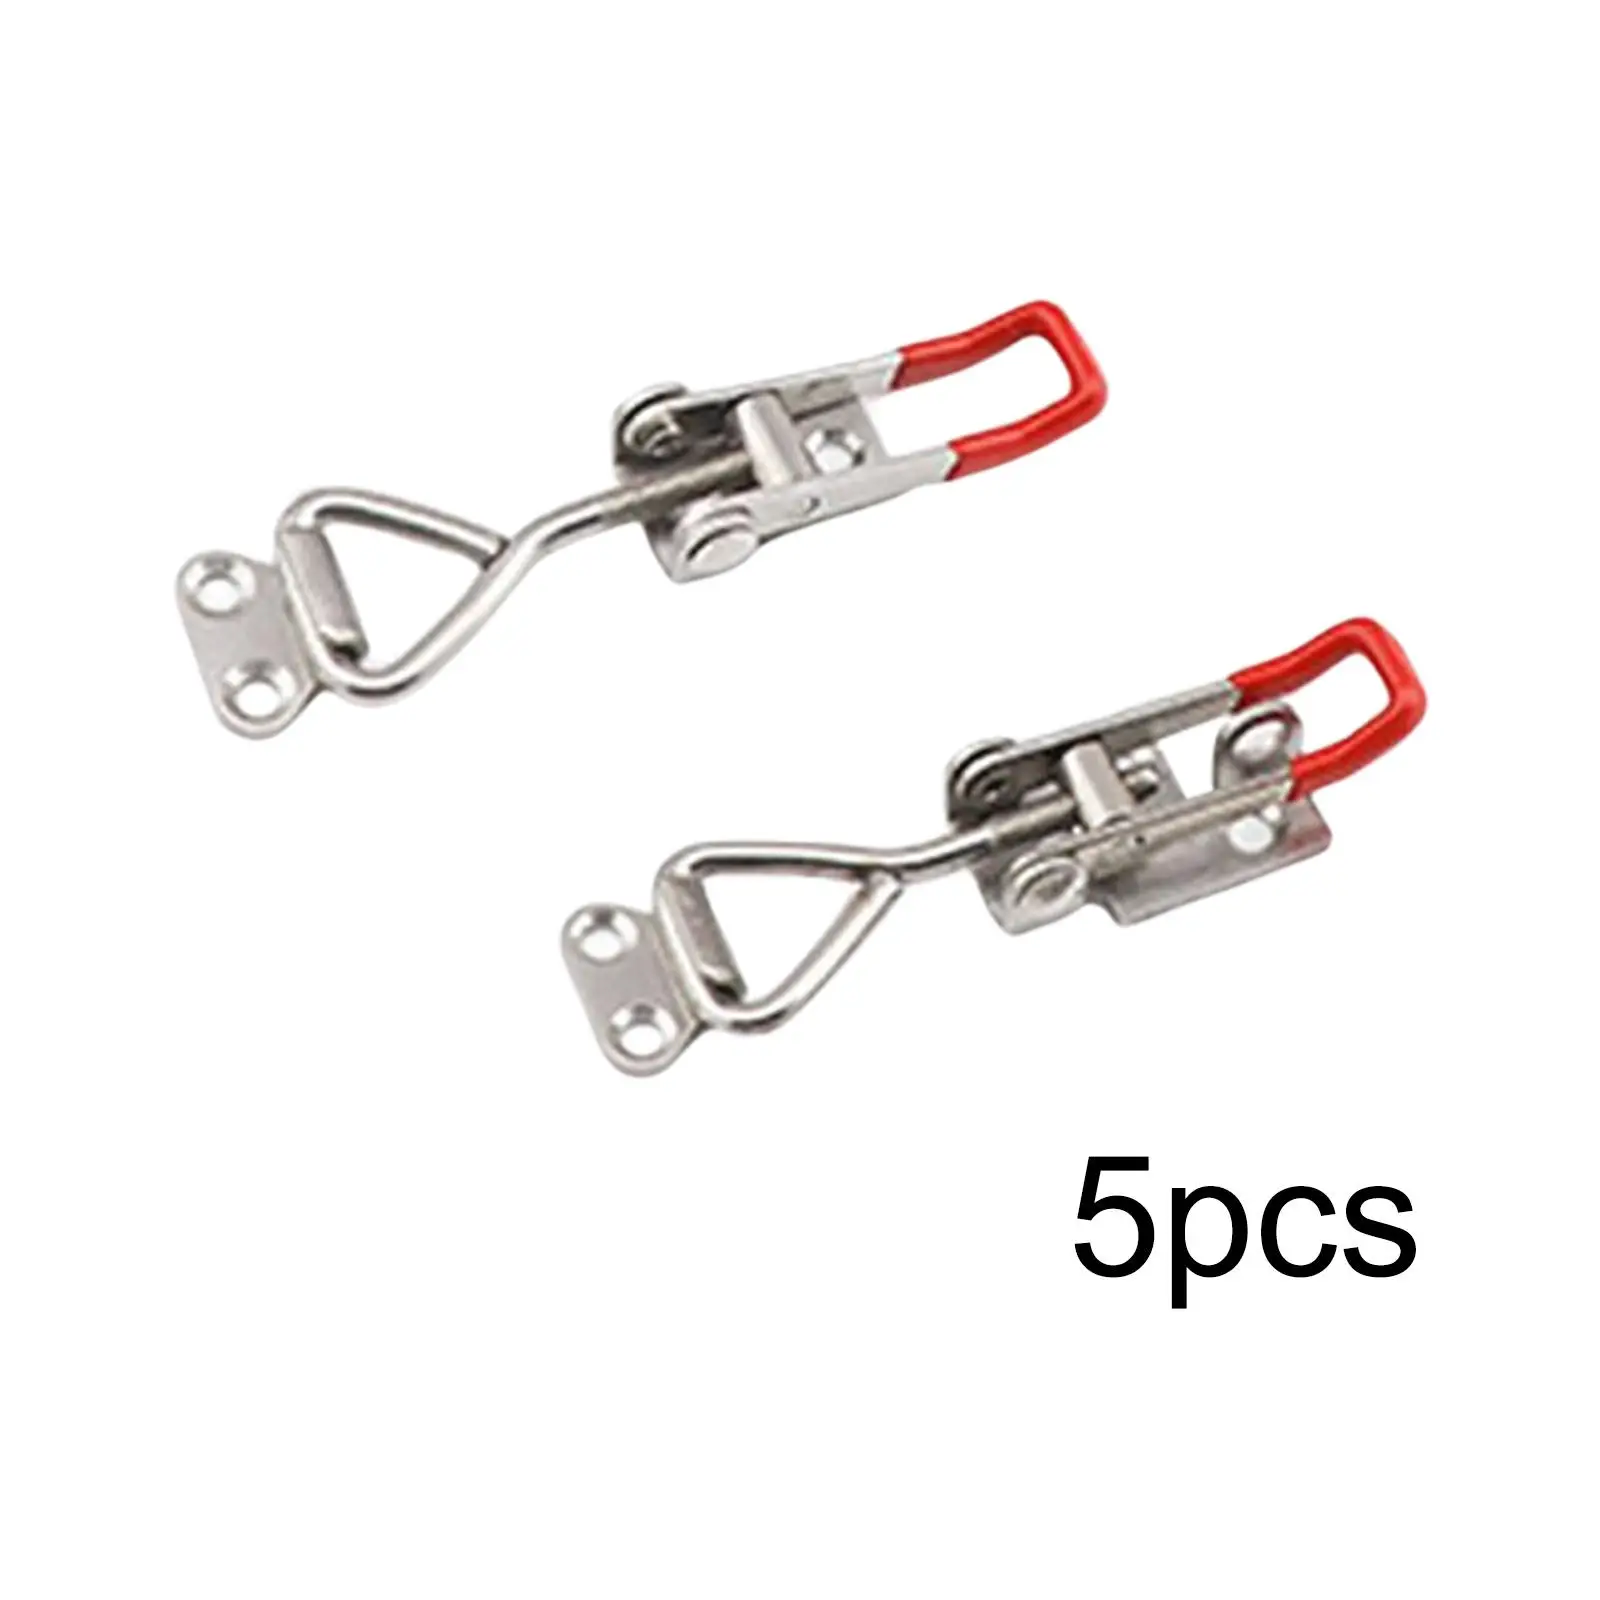 5Pcs Push Pull Action Latch Clamp Steel Reliable Easy to Use Durable Hand Tool Adjustable for Furniture Hardware Tool Box Case